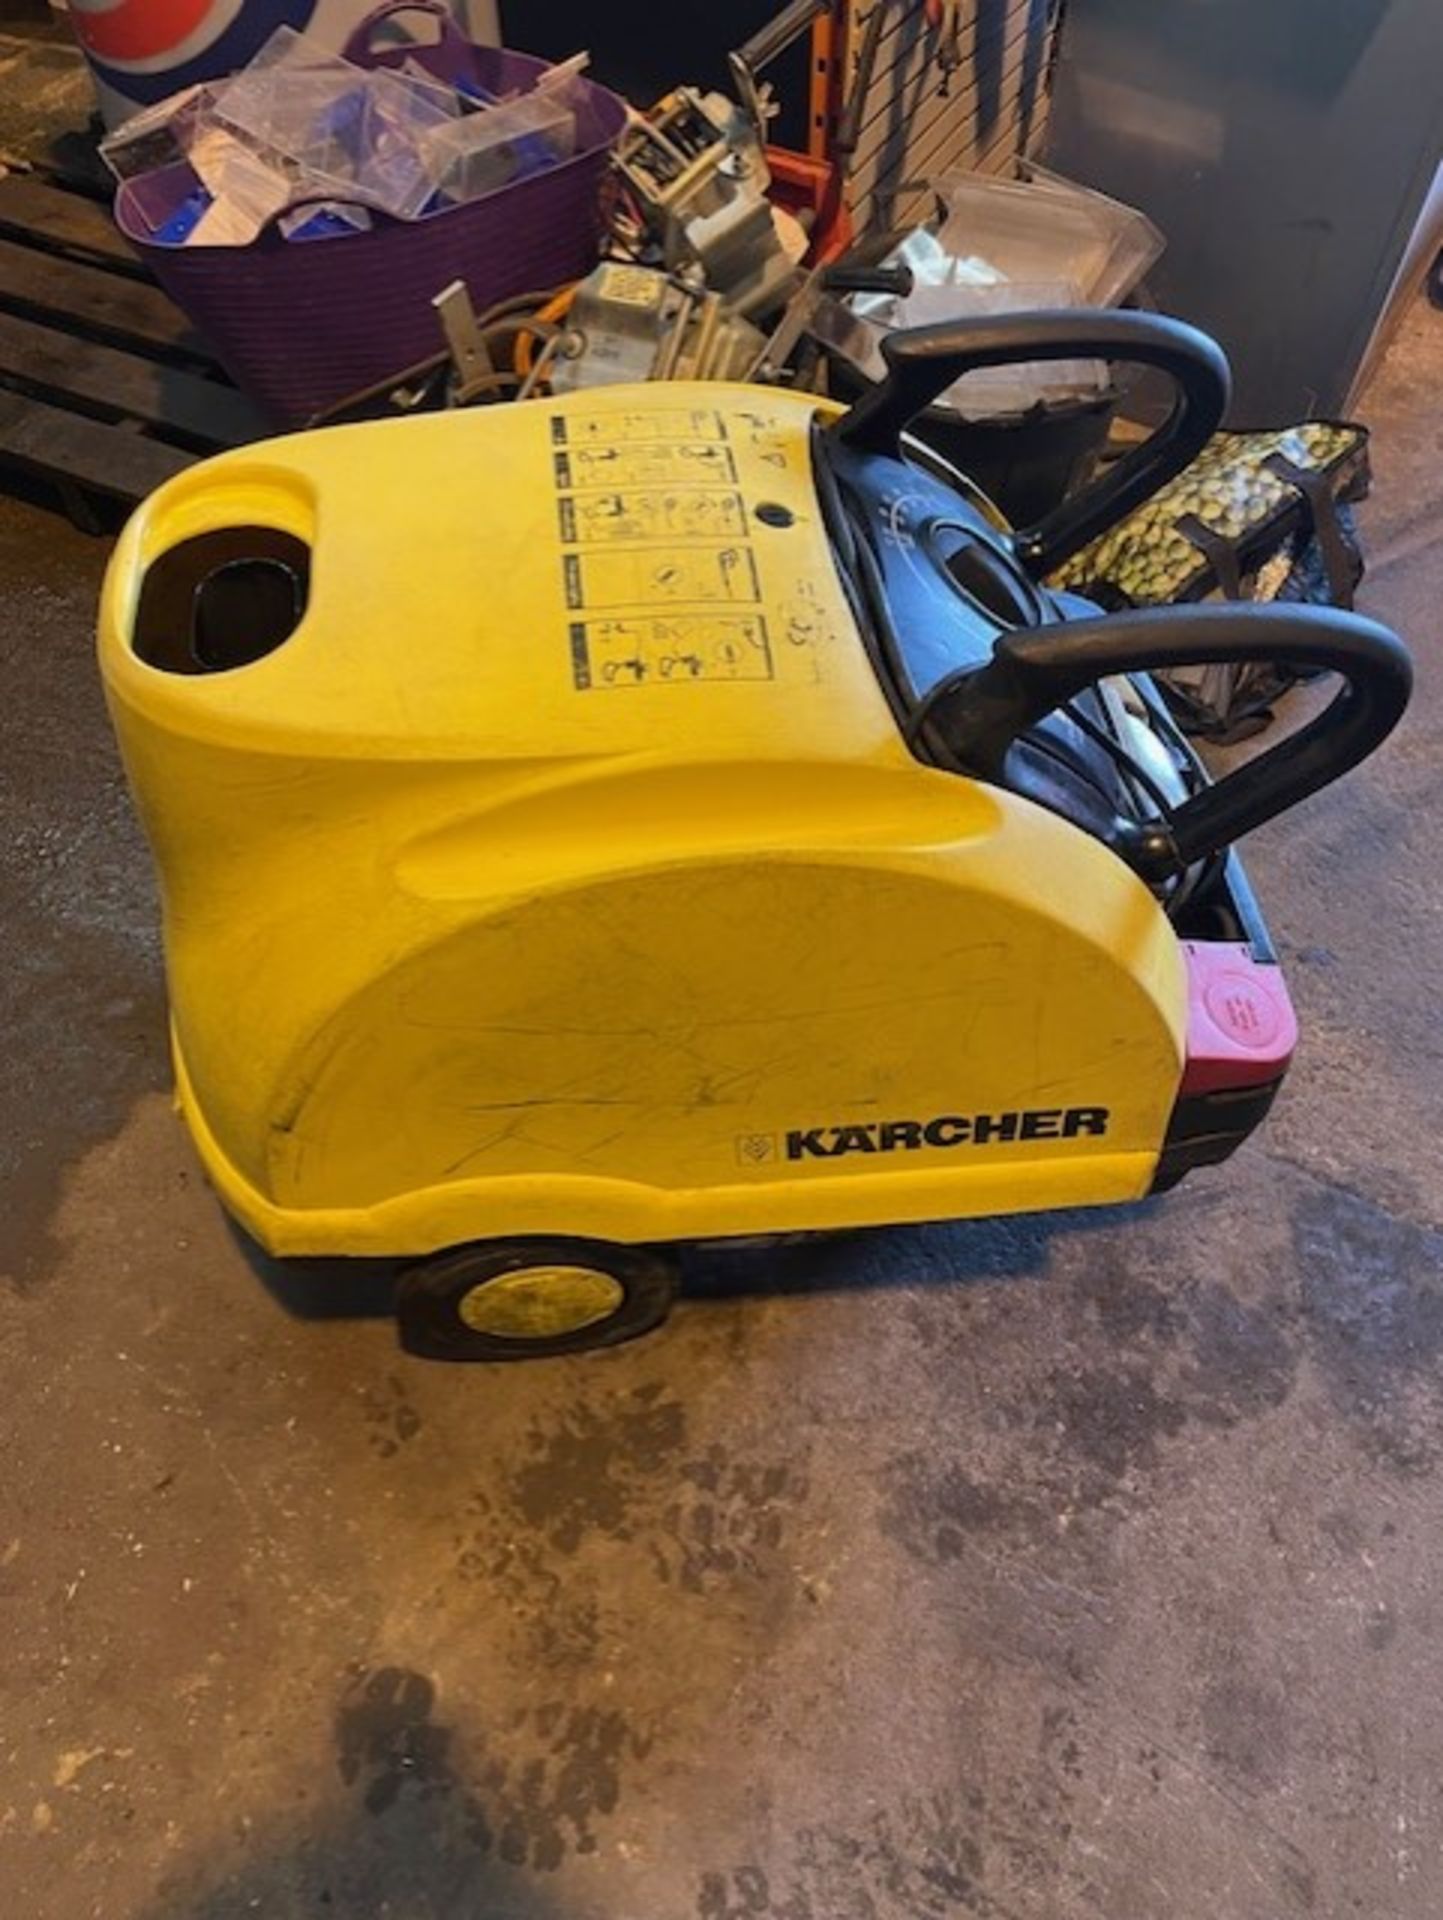 Karcher hot and cold pressure washer hds551 c model it’s in good condition still comes with hose and - Bild 4 aus 10